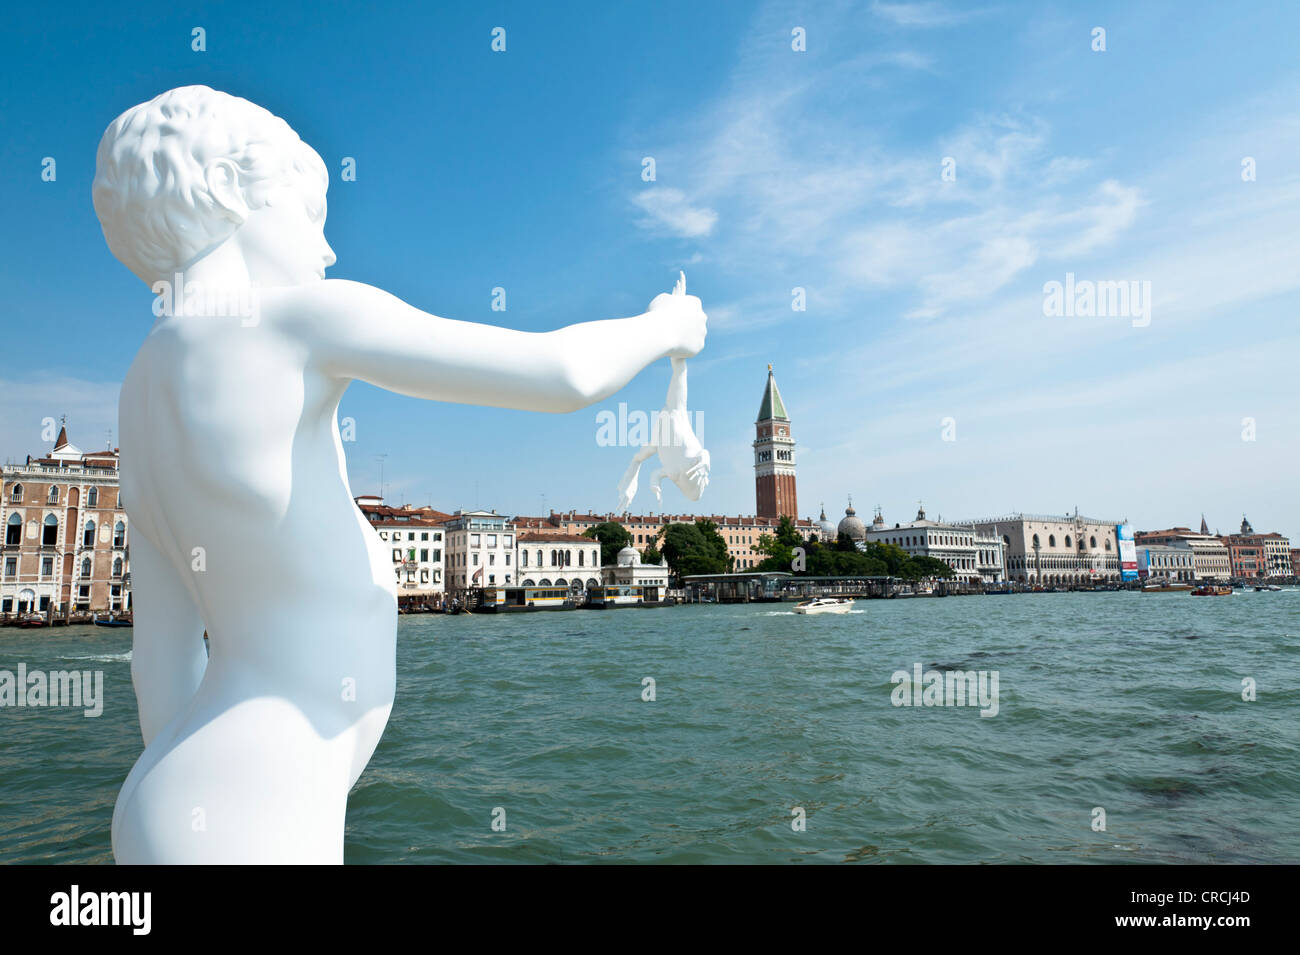 Punta della Dogana, statue of a boy holding a frog by Charles Ray, an American artist, Venice, Italy, Europe Stock Photo